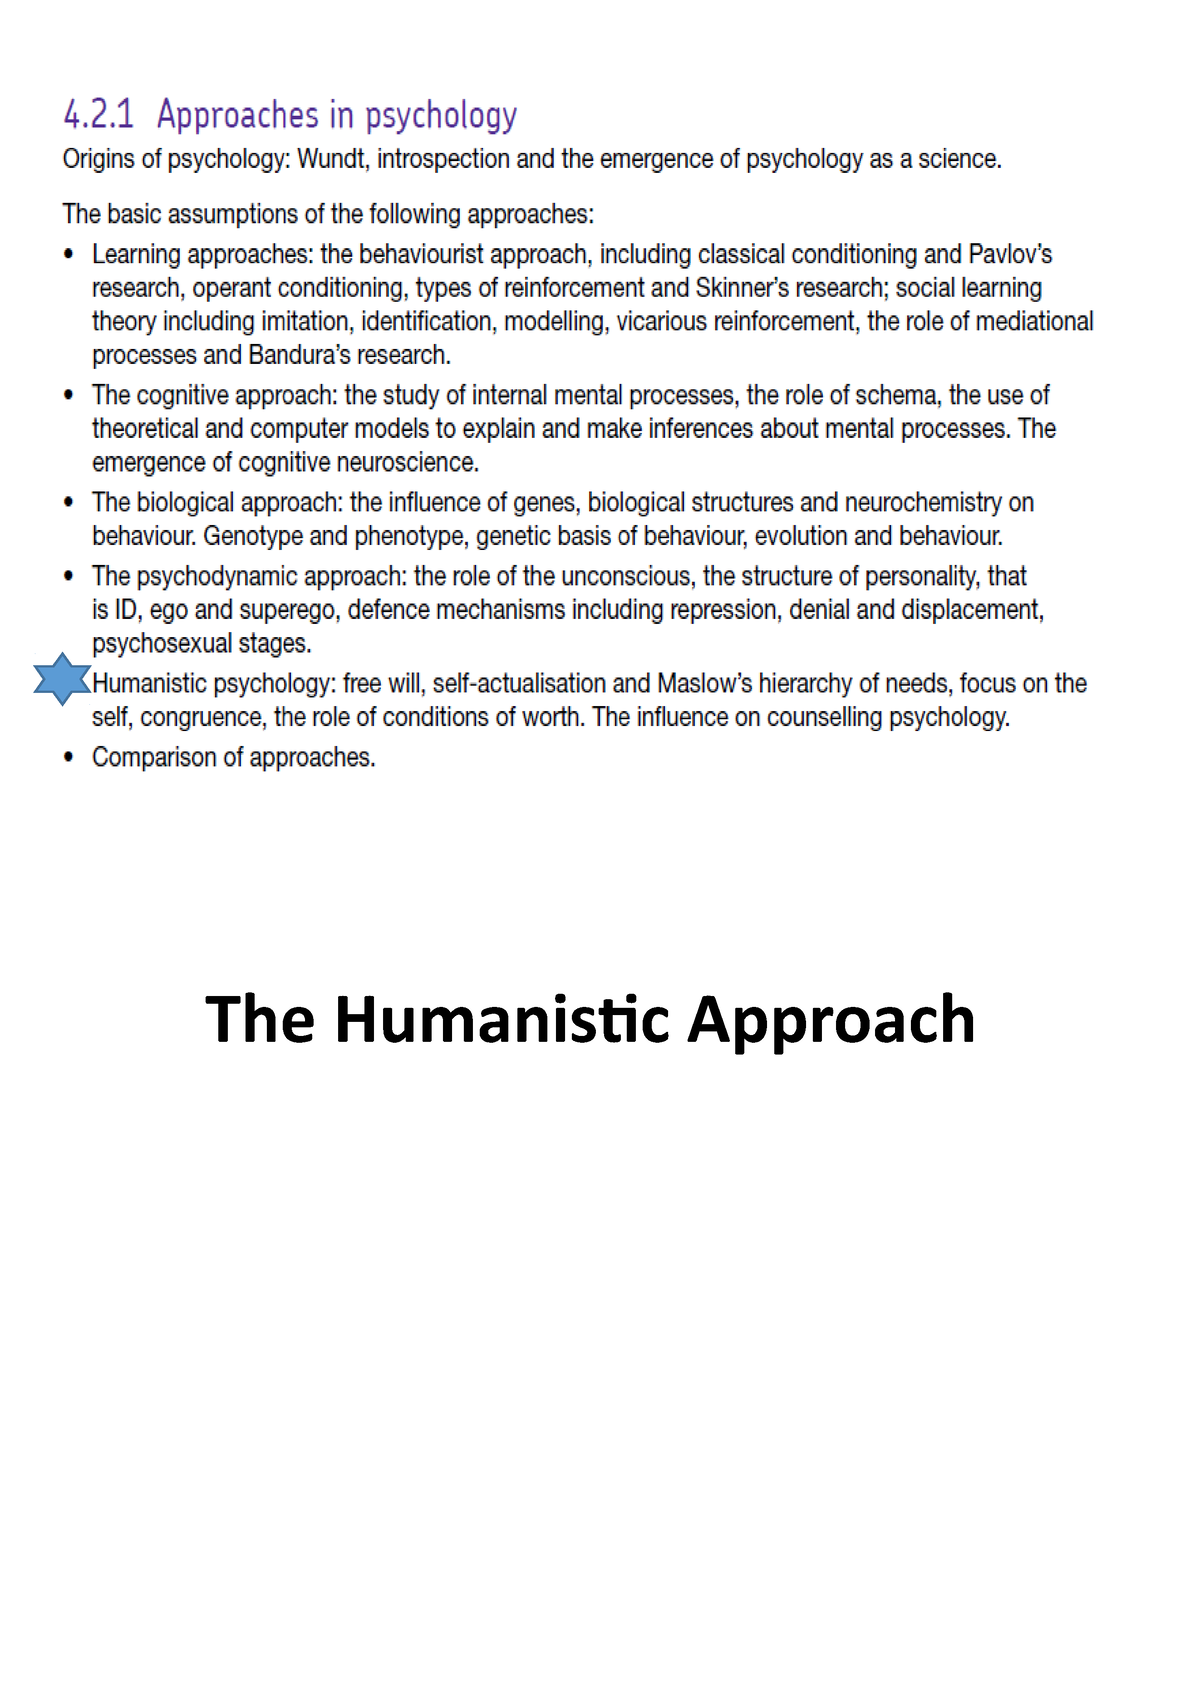 humanistic approach case study